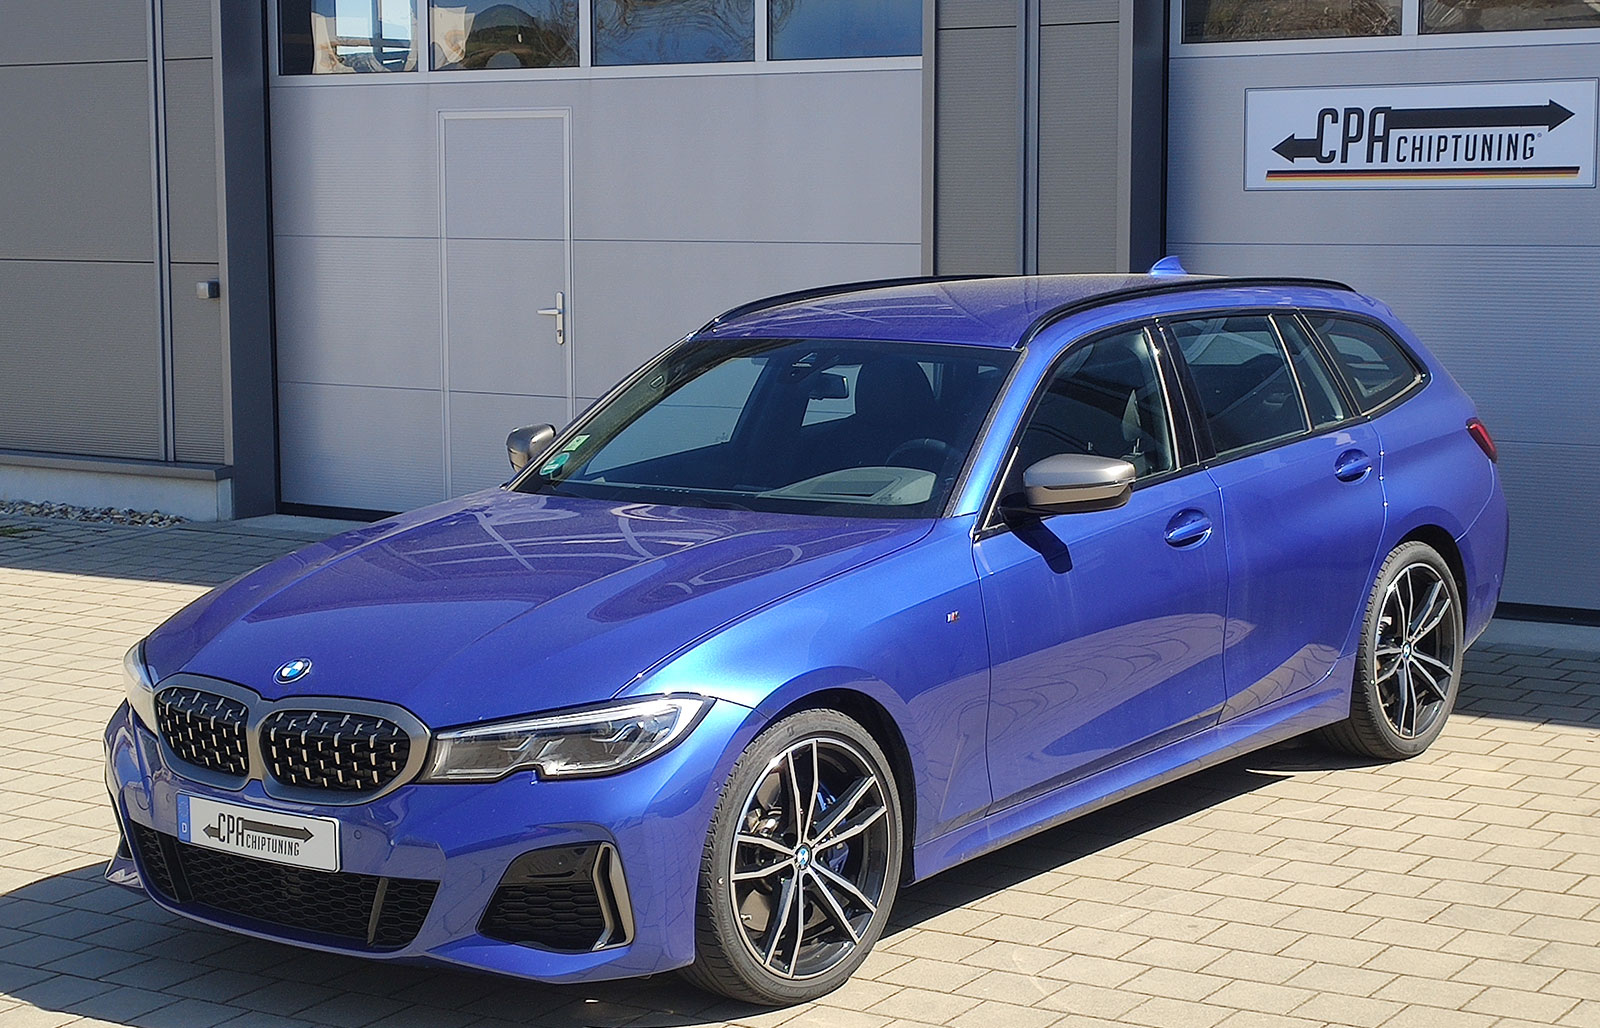 Chiptuning: More Power and Agility for the BMW 3 Series M340i